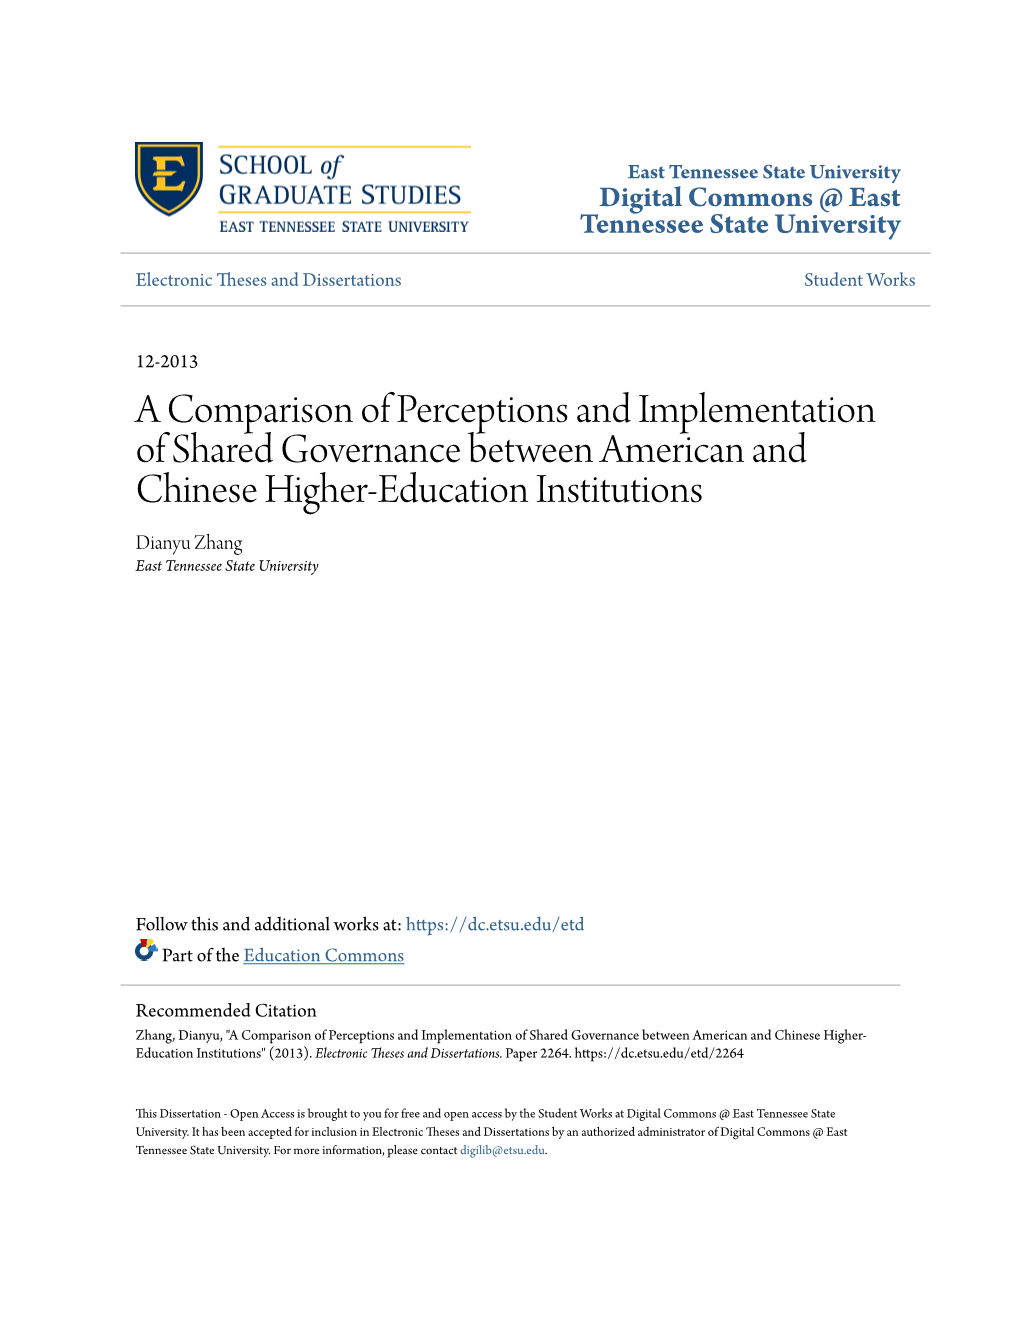 A Comparison of Perceptions and Implementation of Shared Governance Between American and Chinese Higher-Education Institutions